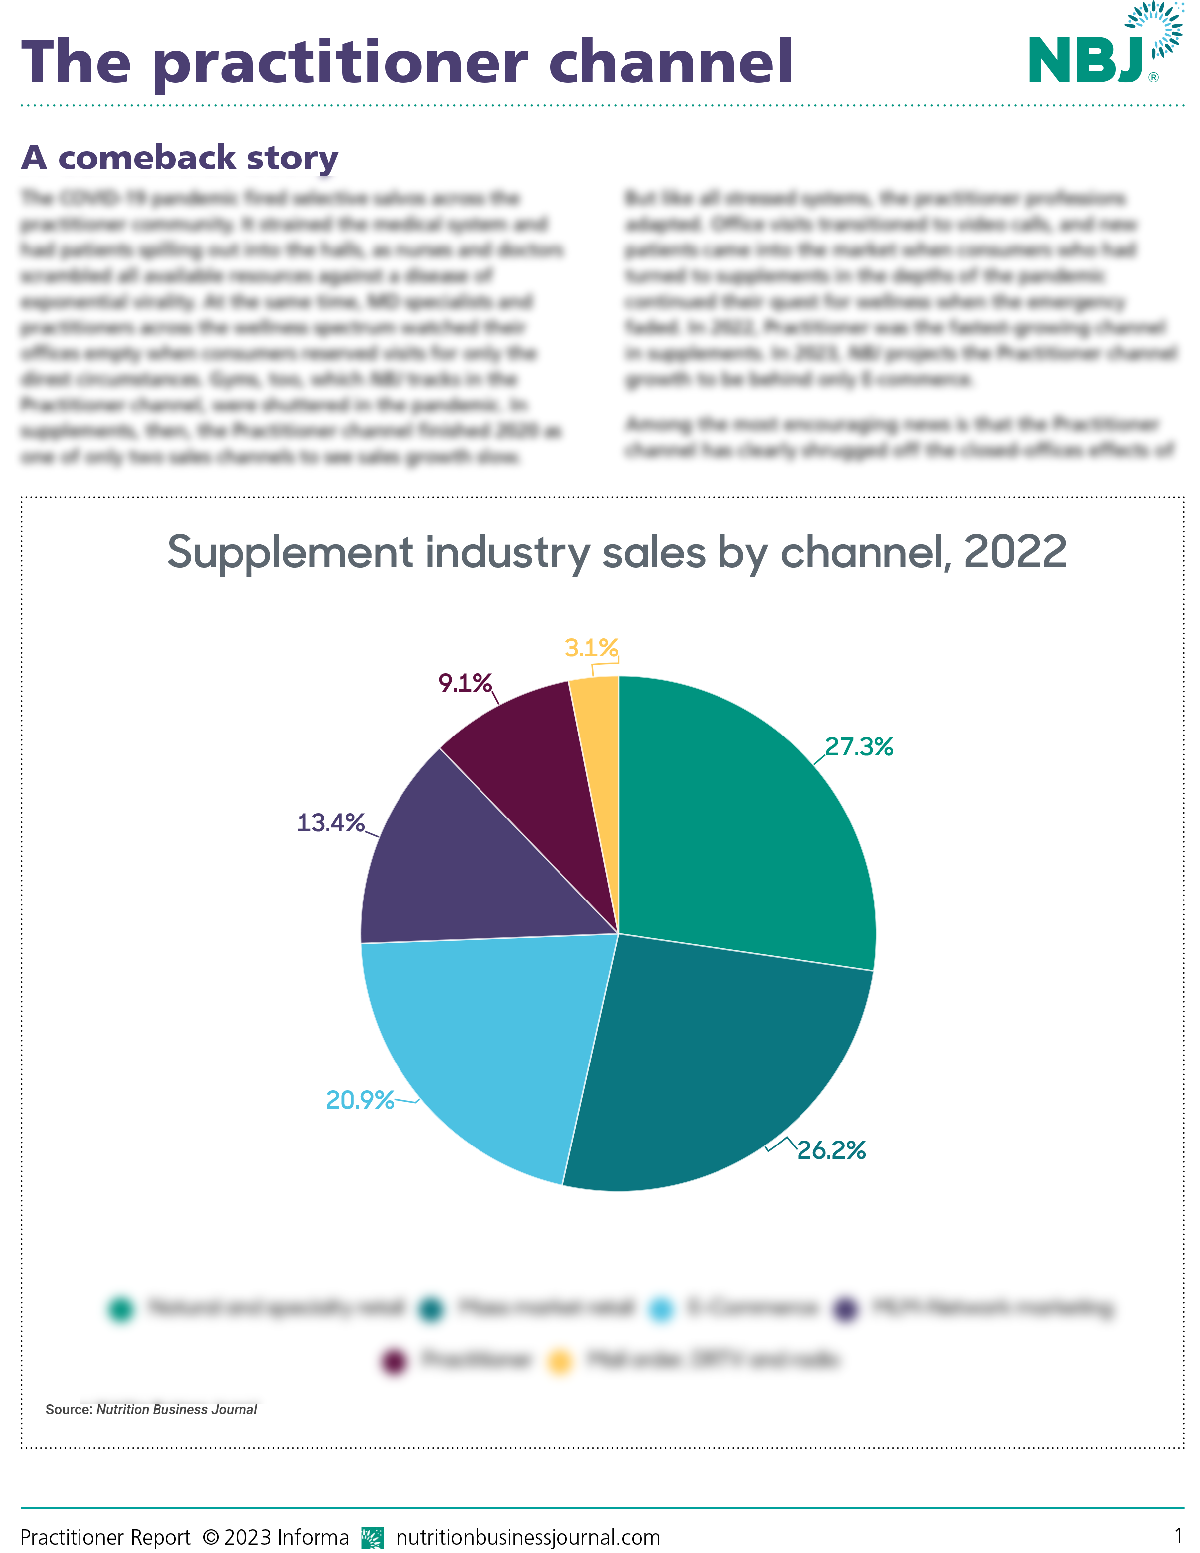 Supplement industry sales by channel 2022